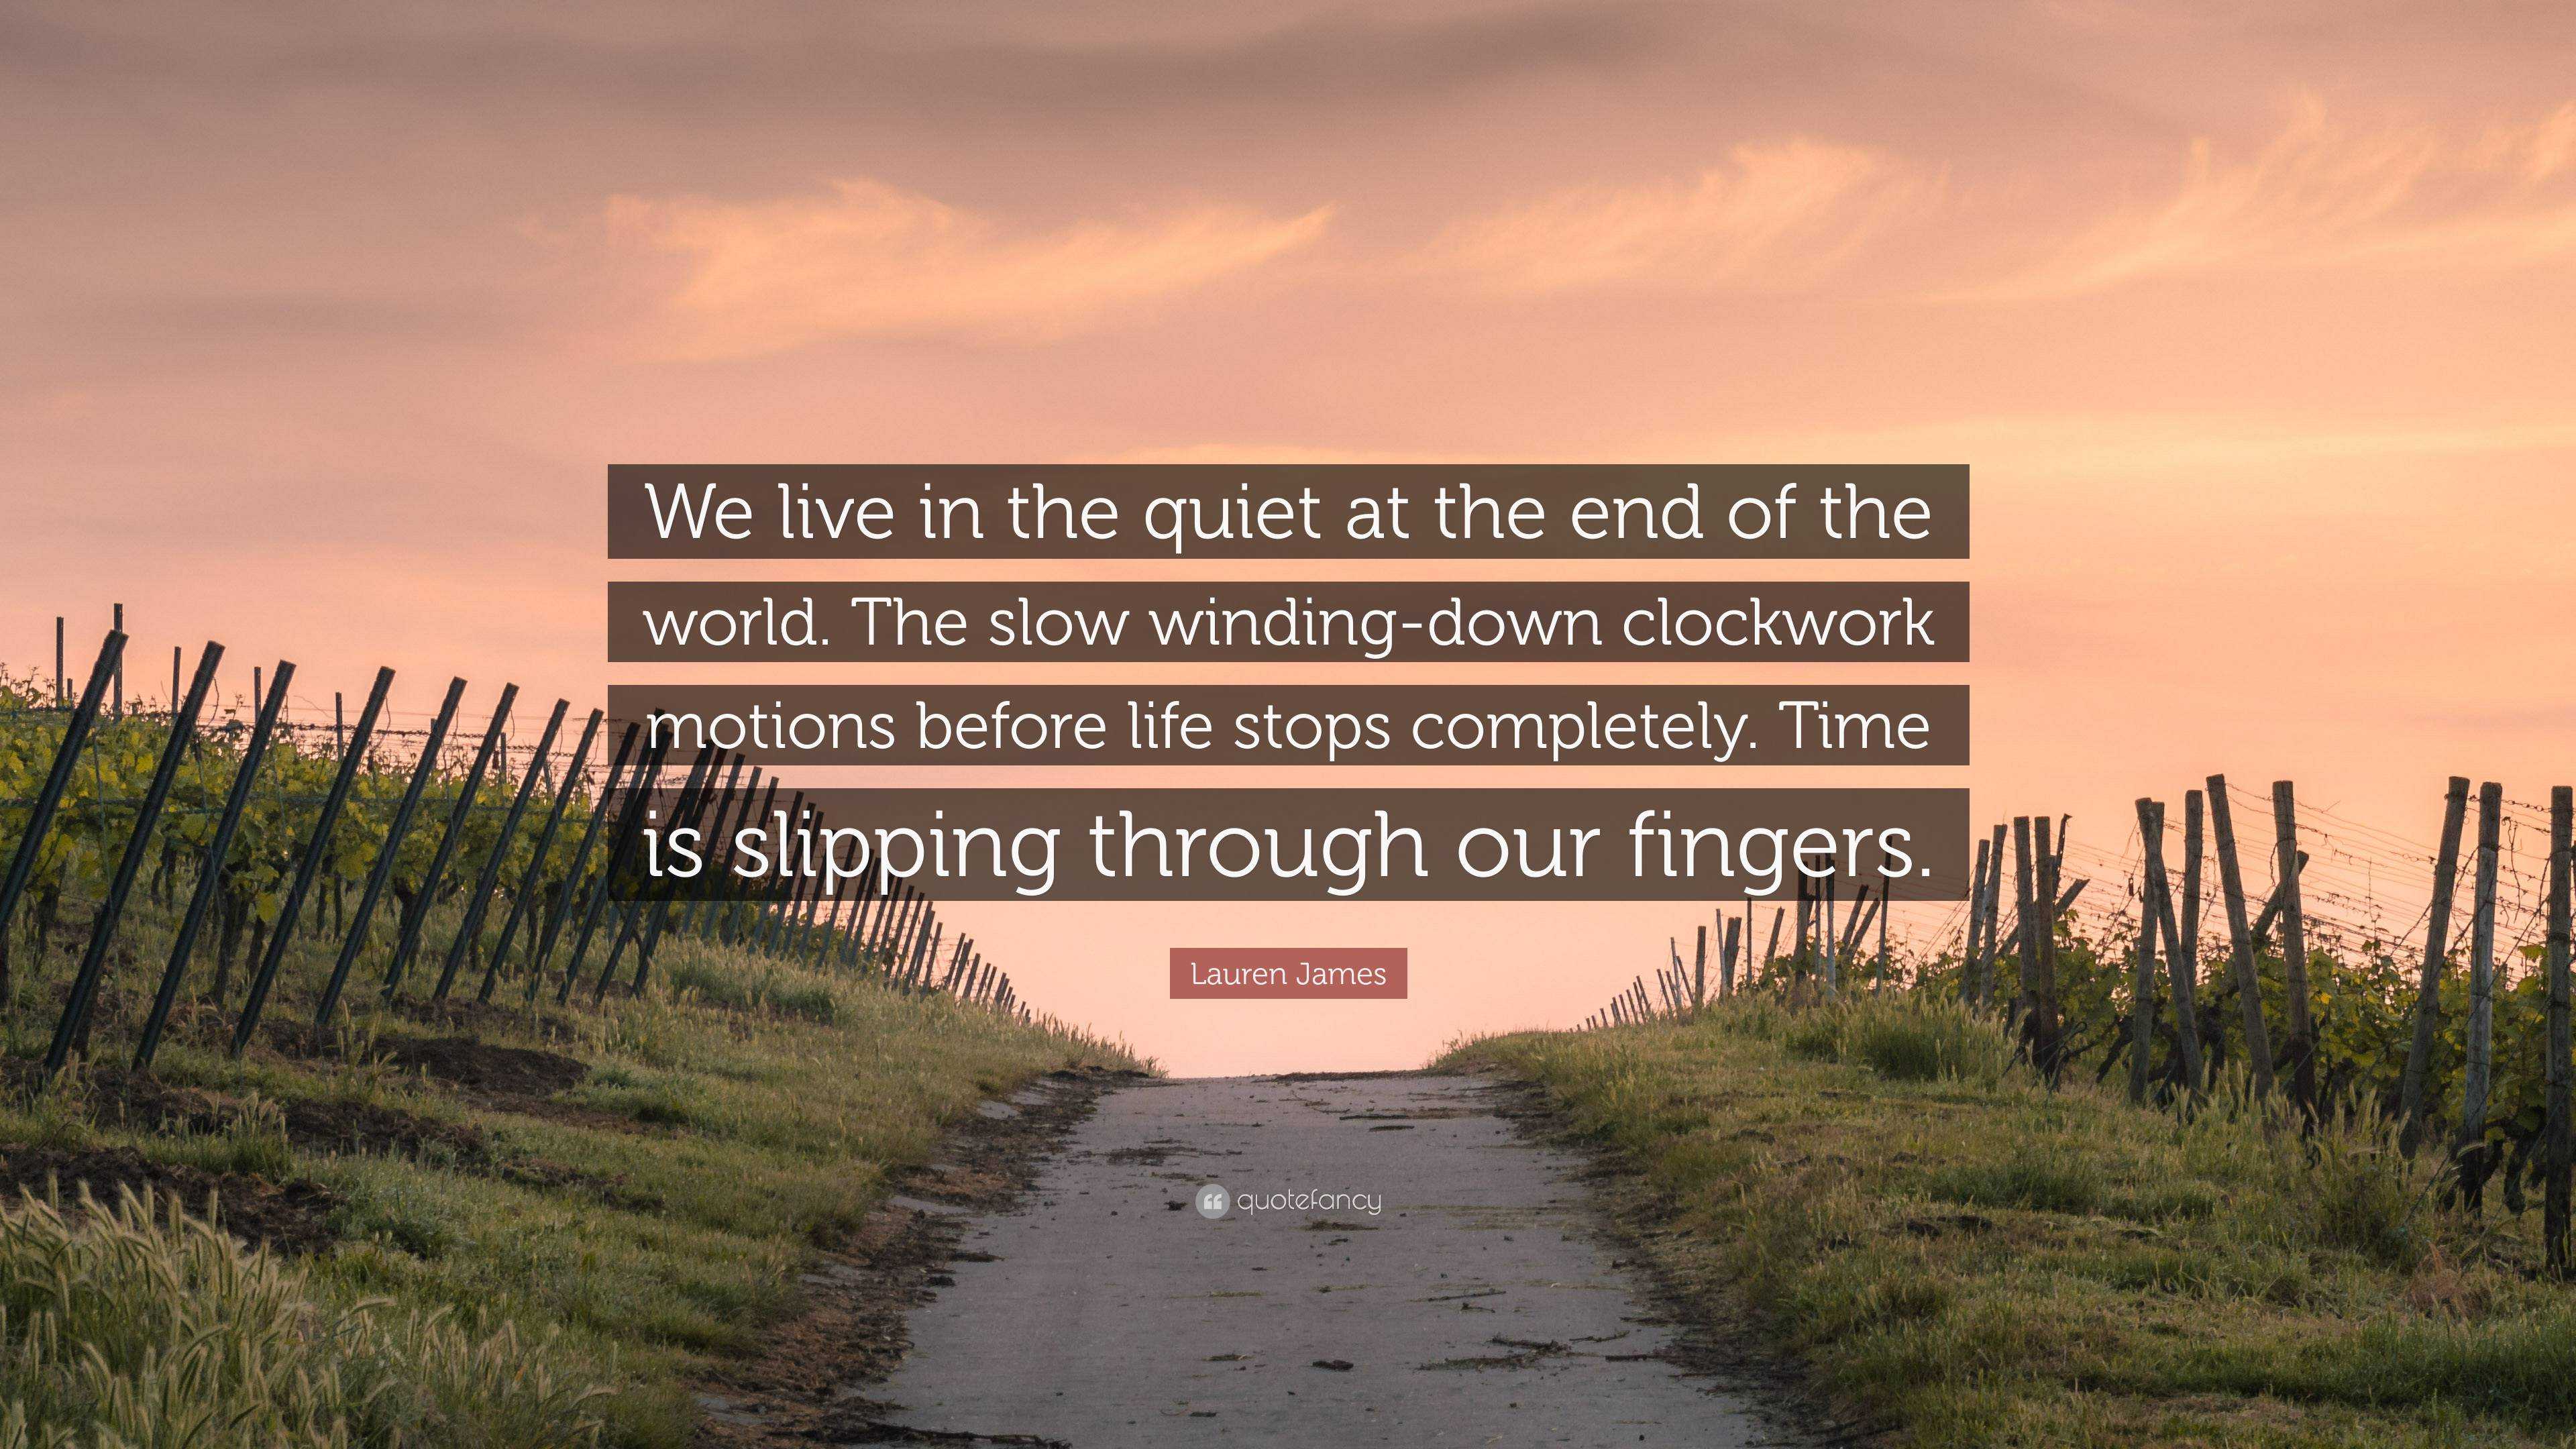 Lauren James Quote: “We Live In The Quiet At The End Of The World. The Slow  Winding-Down Clockwork Motions Before Life Stops Completely. Time...”